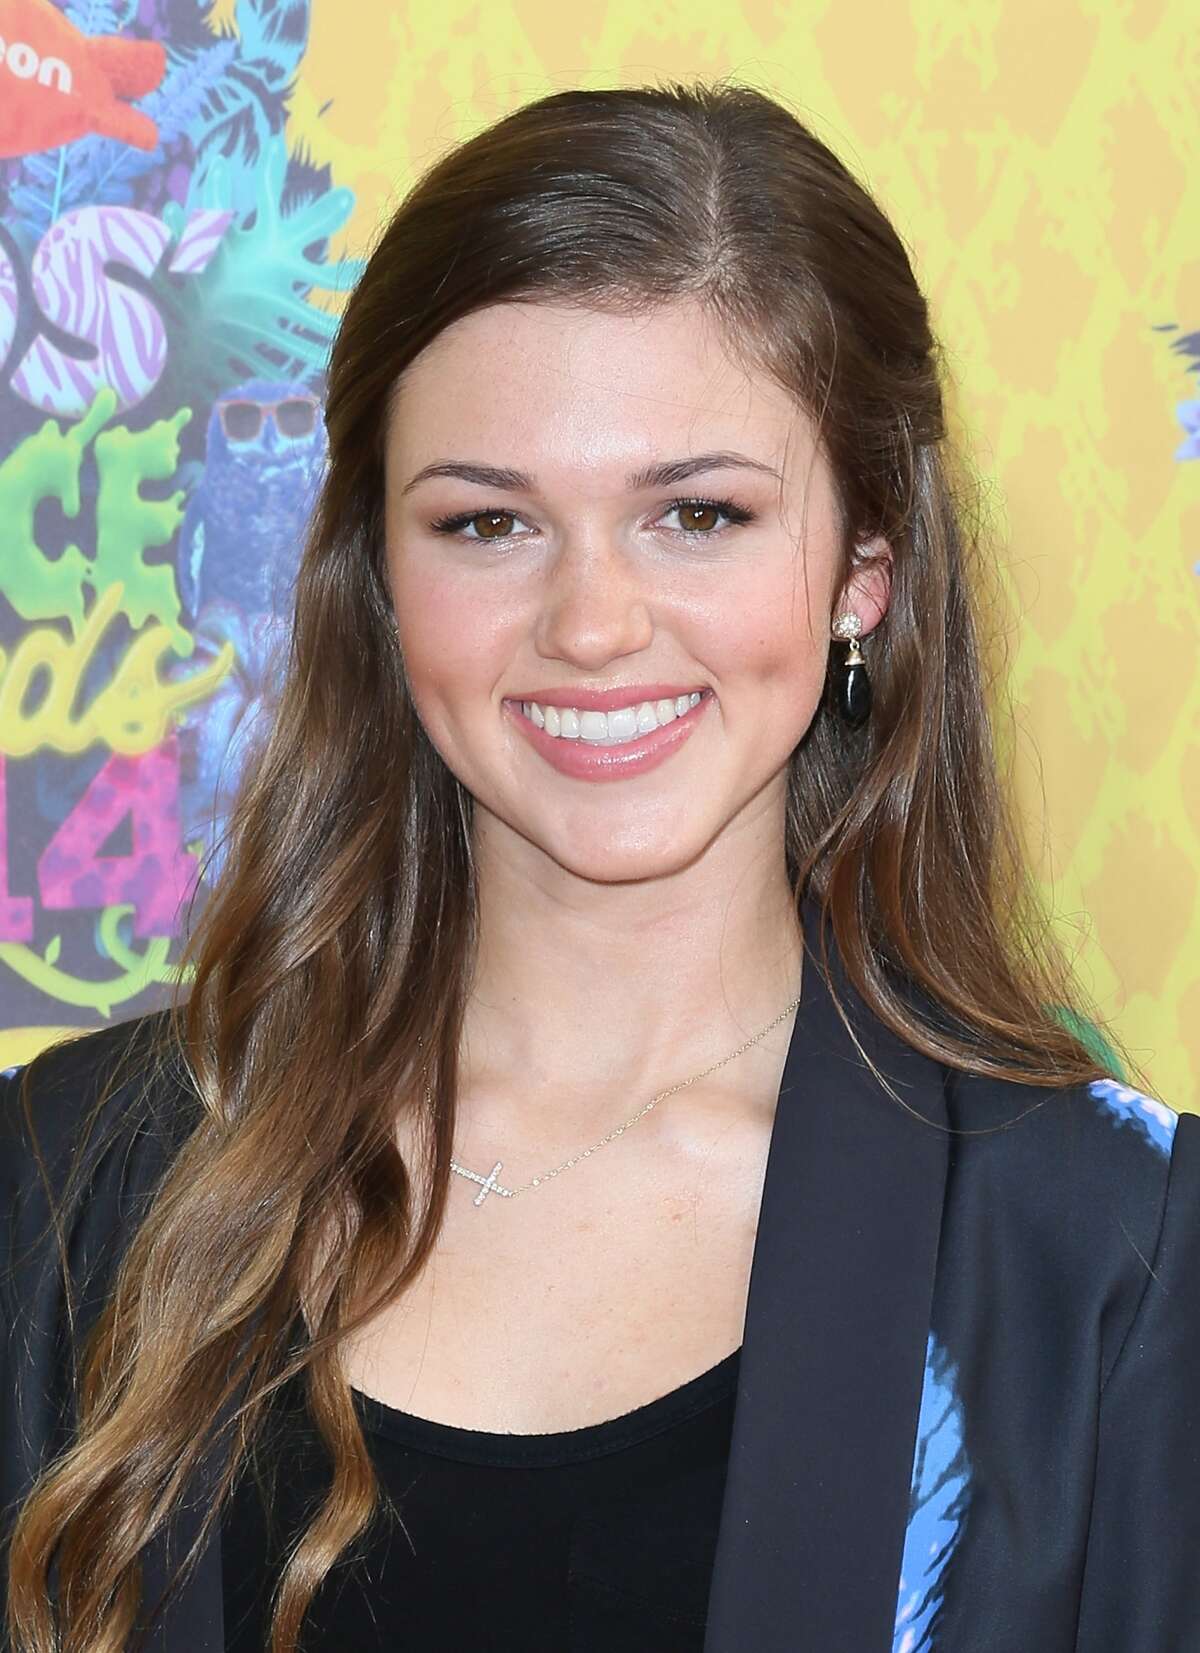 Sadie Robertson of "Duck Dynasty" Paired with Mark Ballas